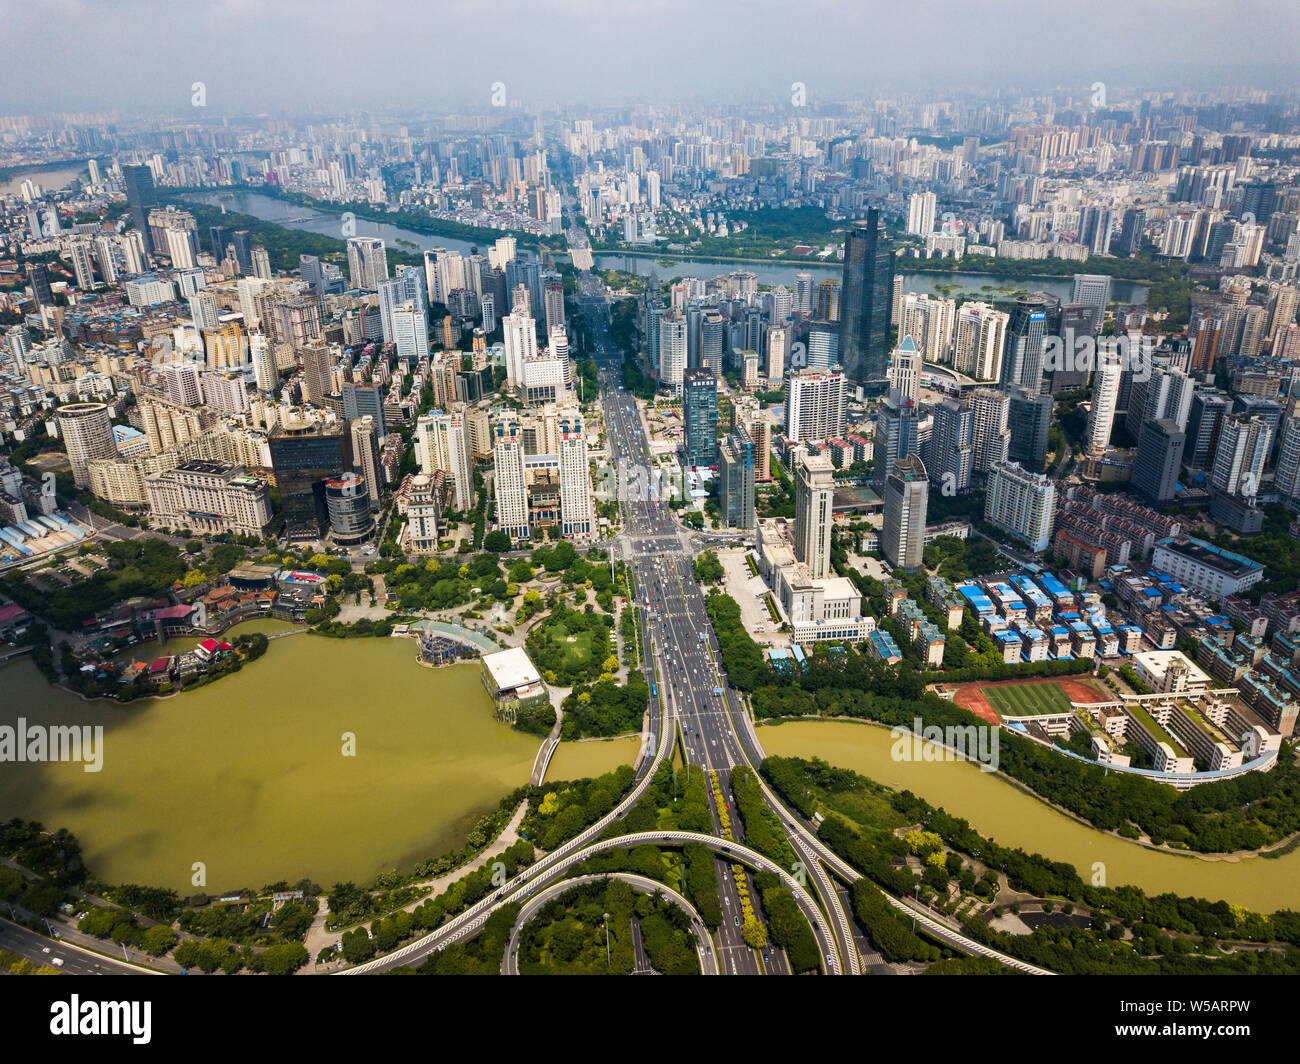 Aerial skyline of Nanning, the capital city of Guangxi province in China Stock Photo